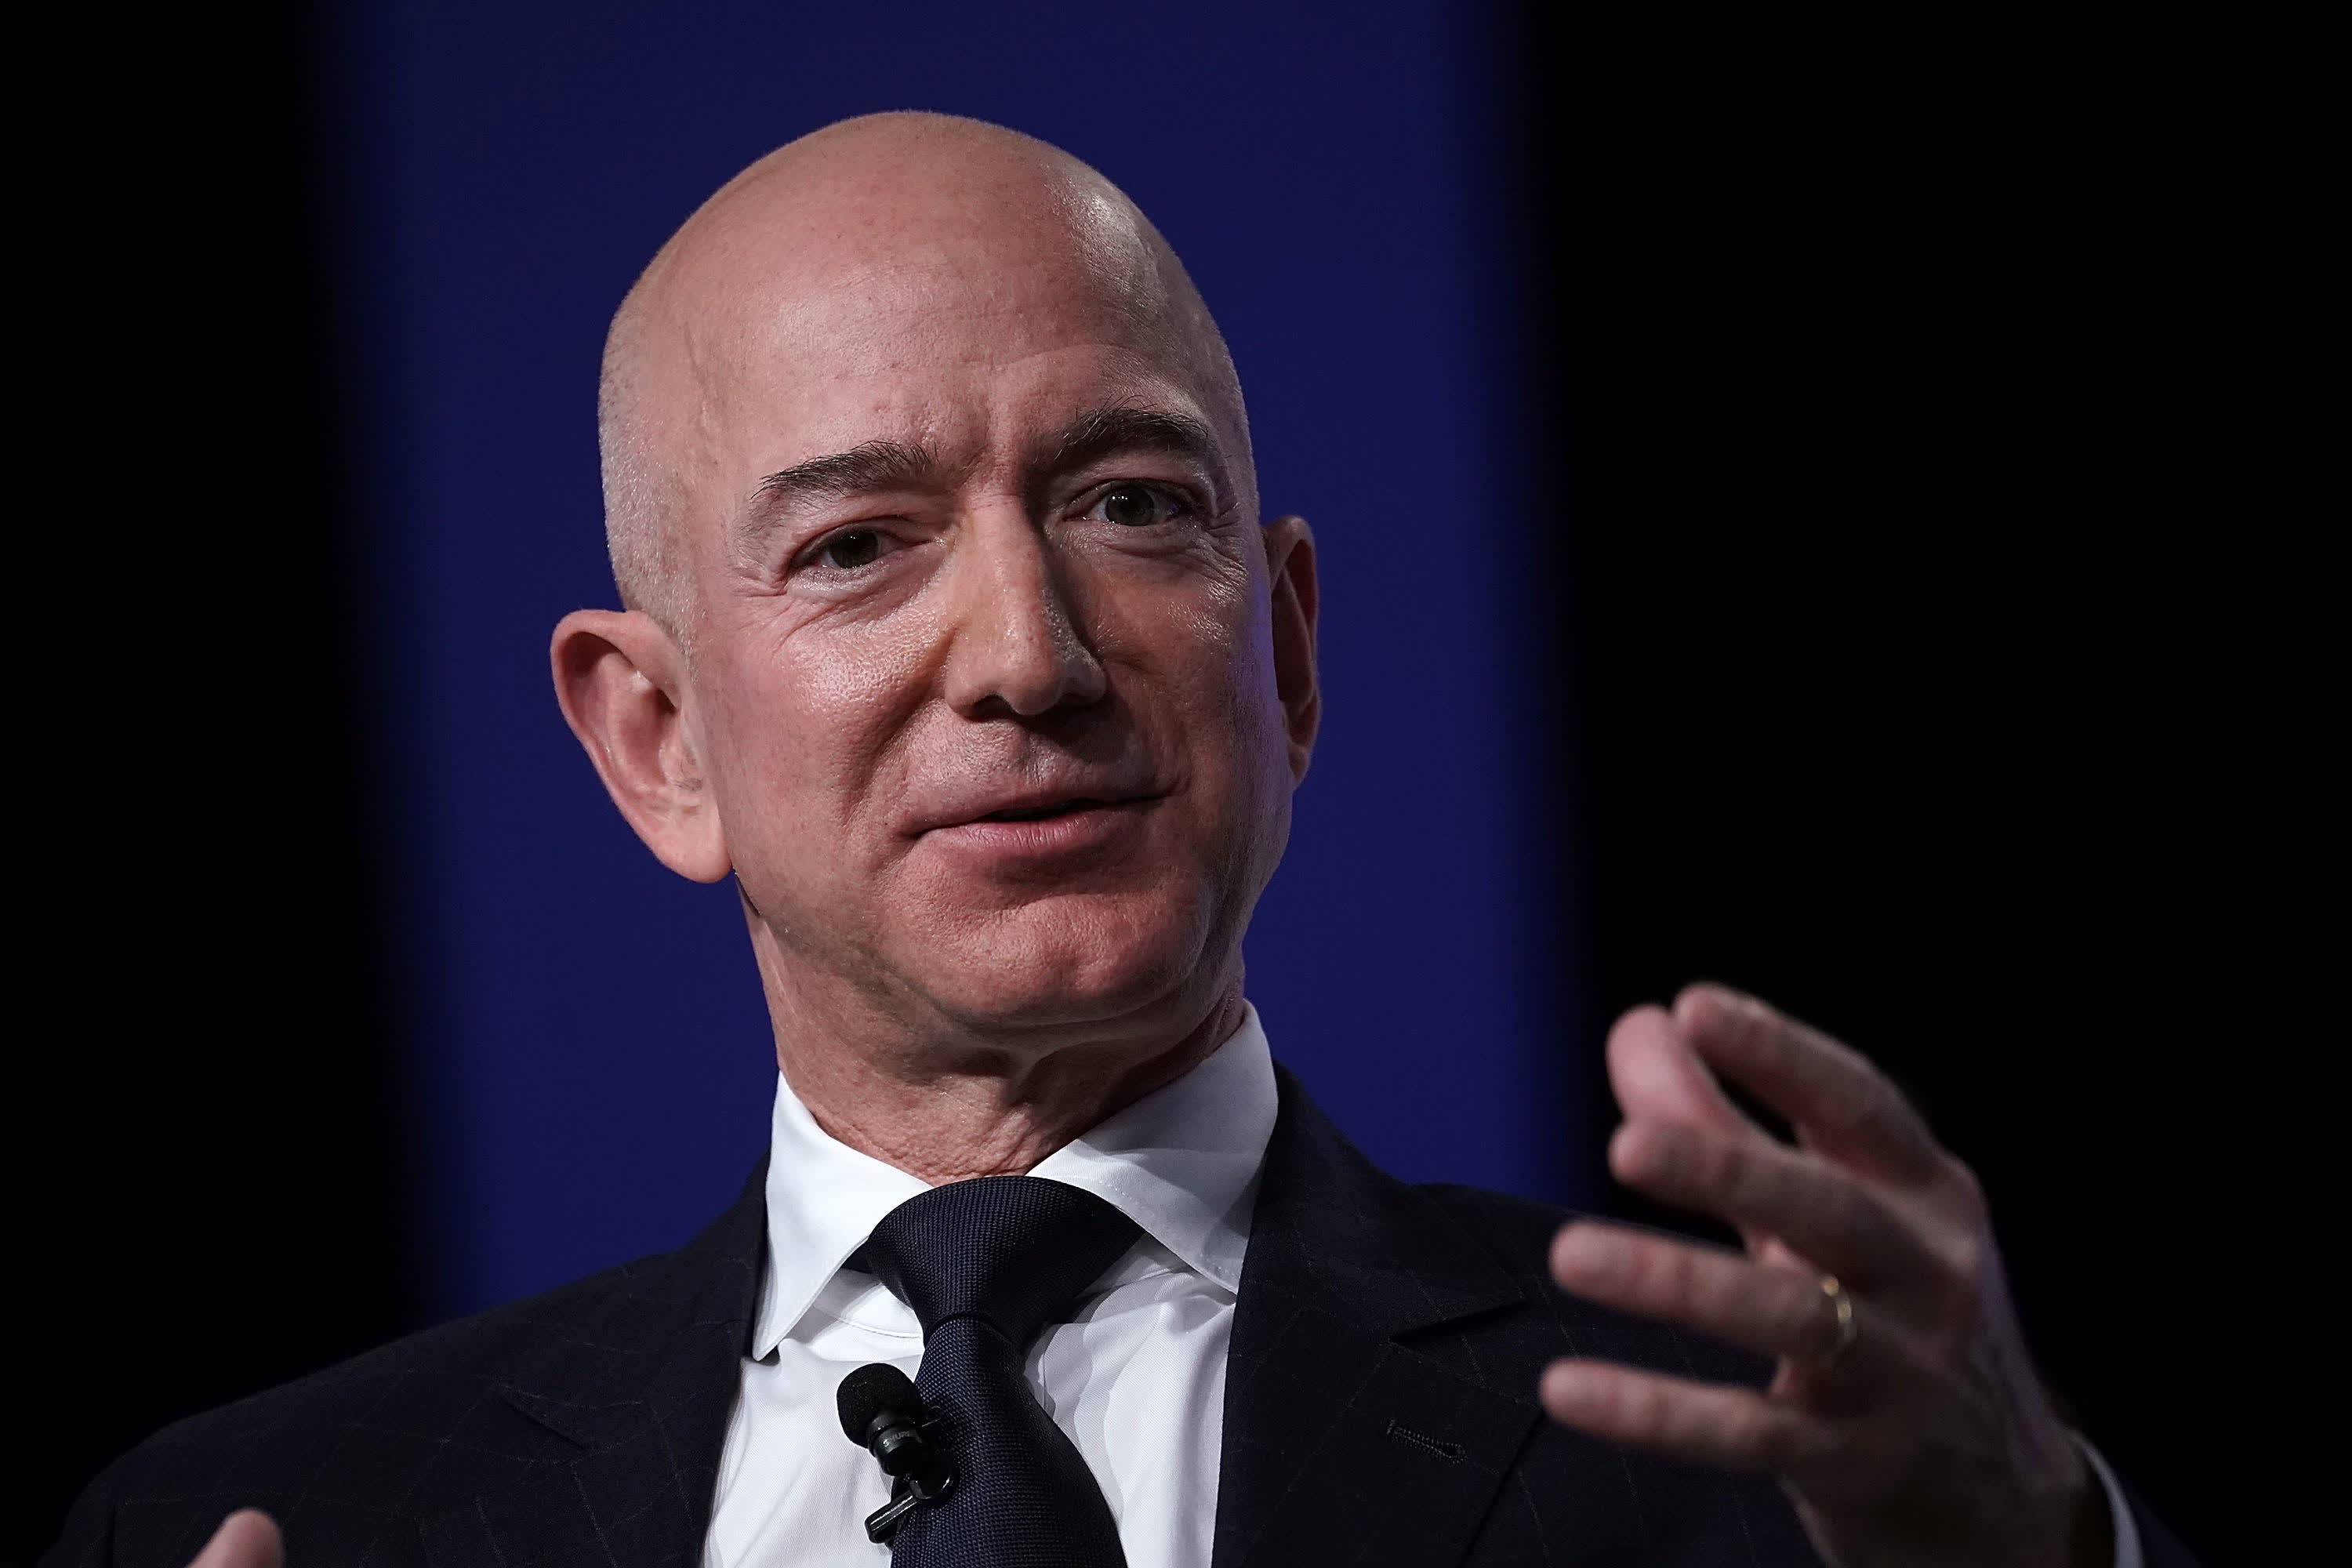 Amazon's healthcare partnership with Berkshire Hathaway and JPMorgan is reportedly ending soon